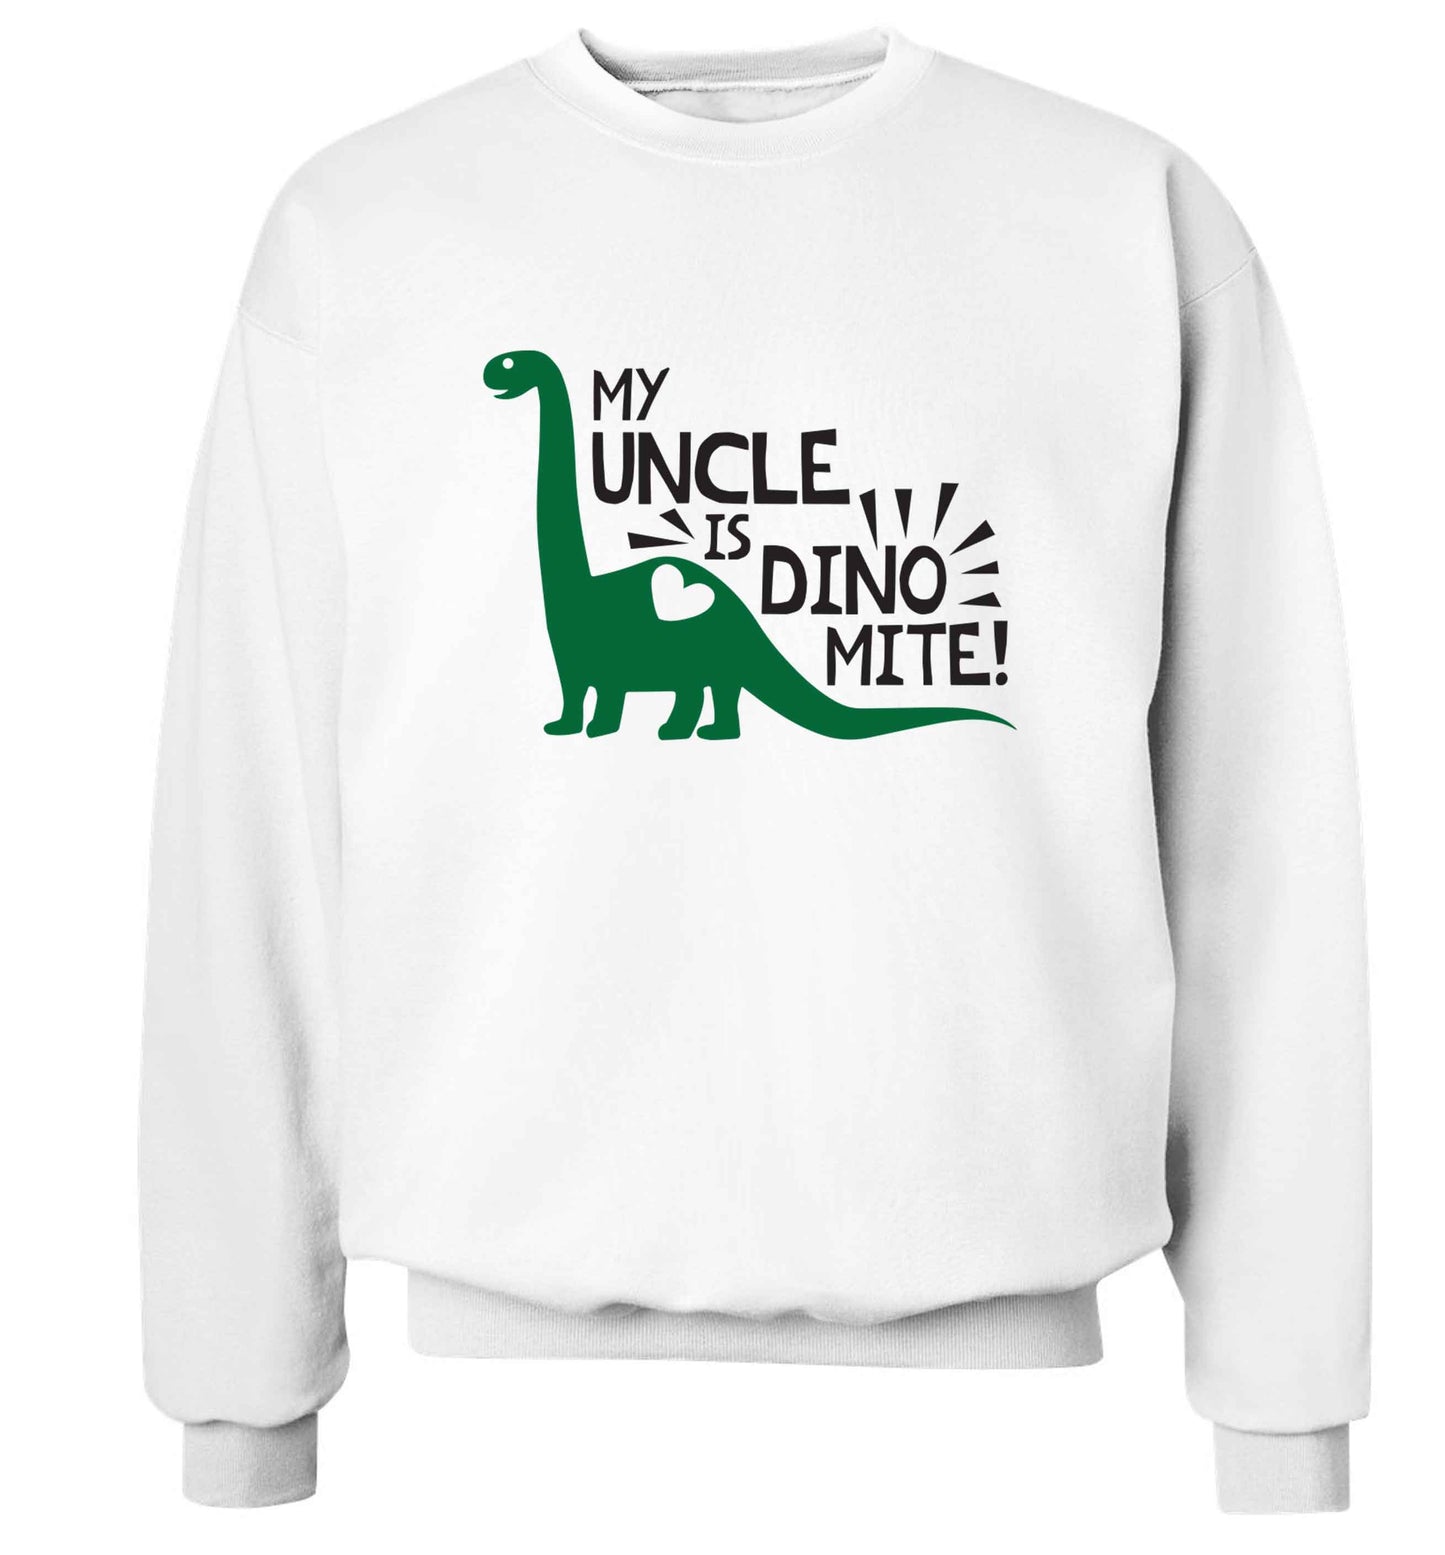 My uncle is dinomite! Adult's unisex white Sweater 2XL